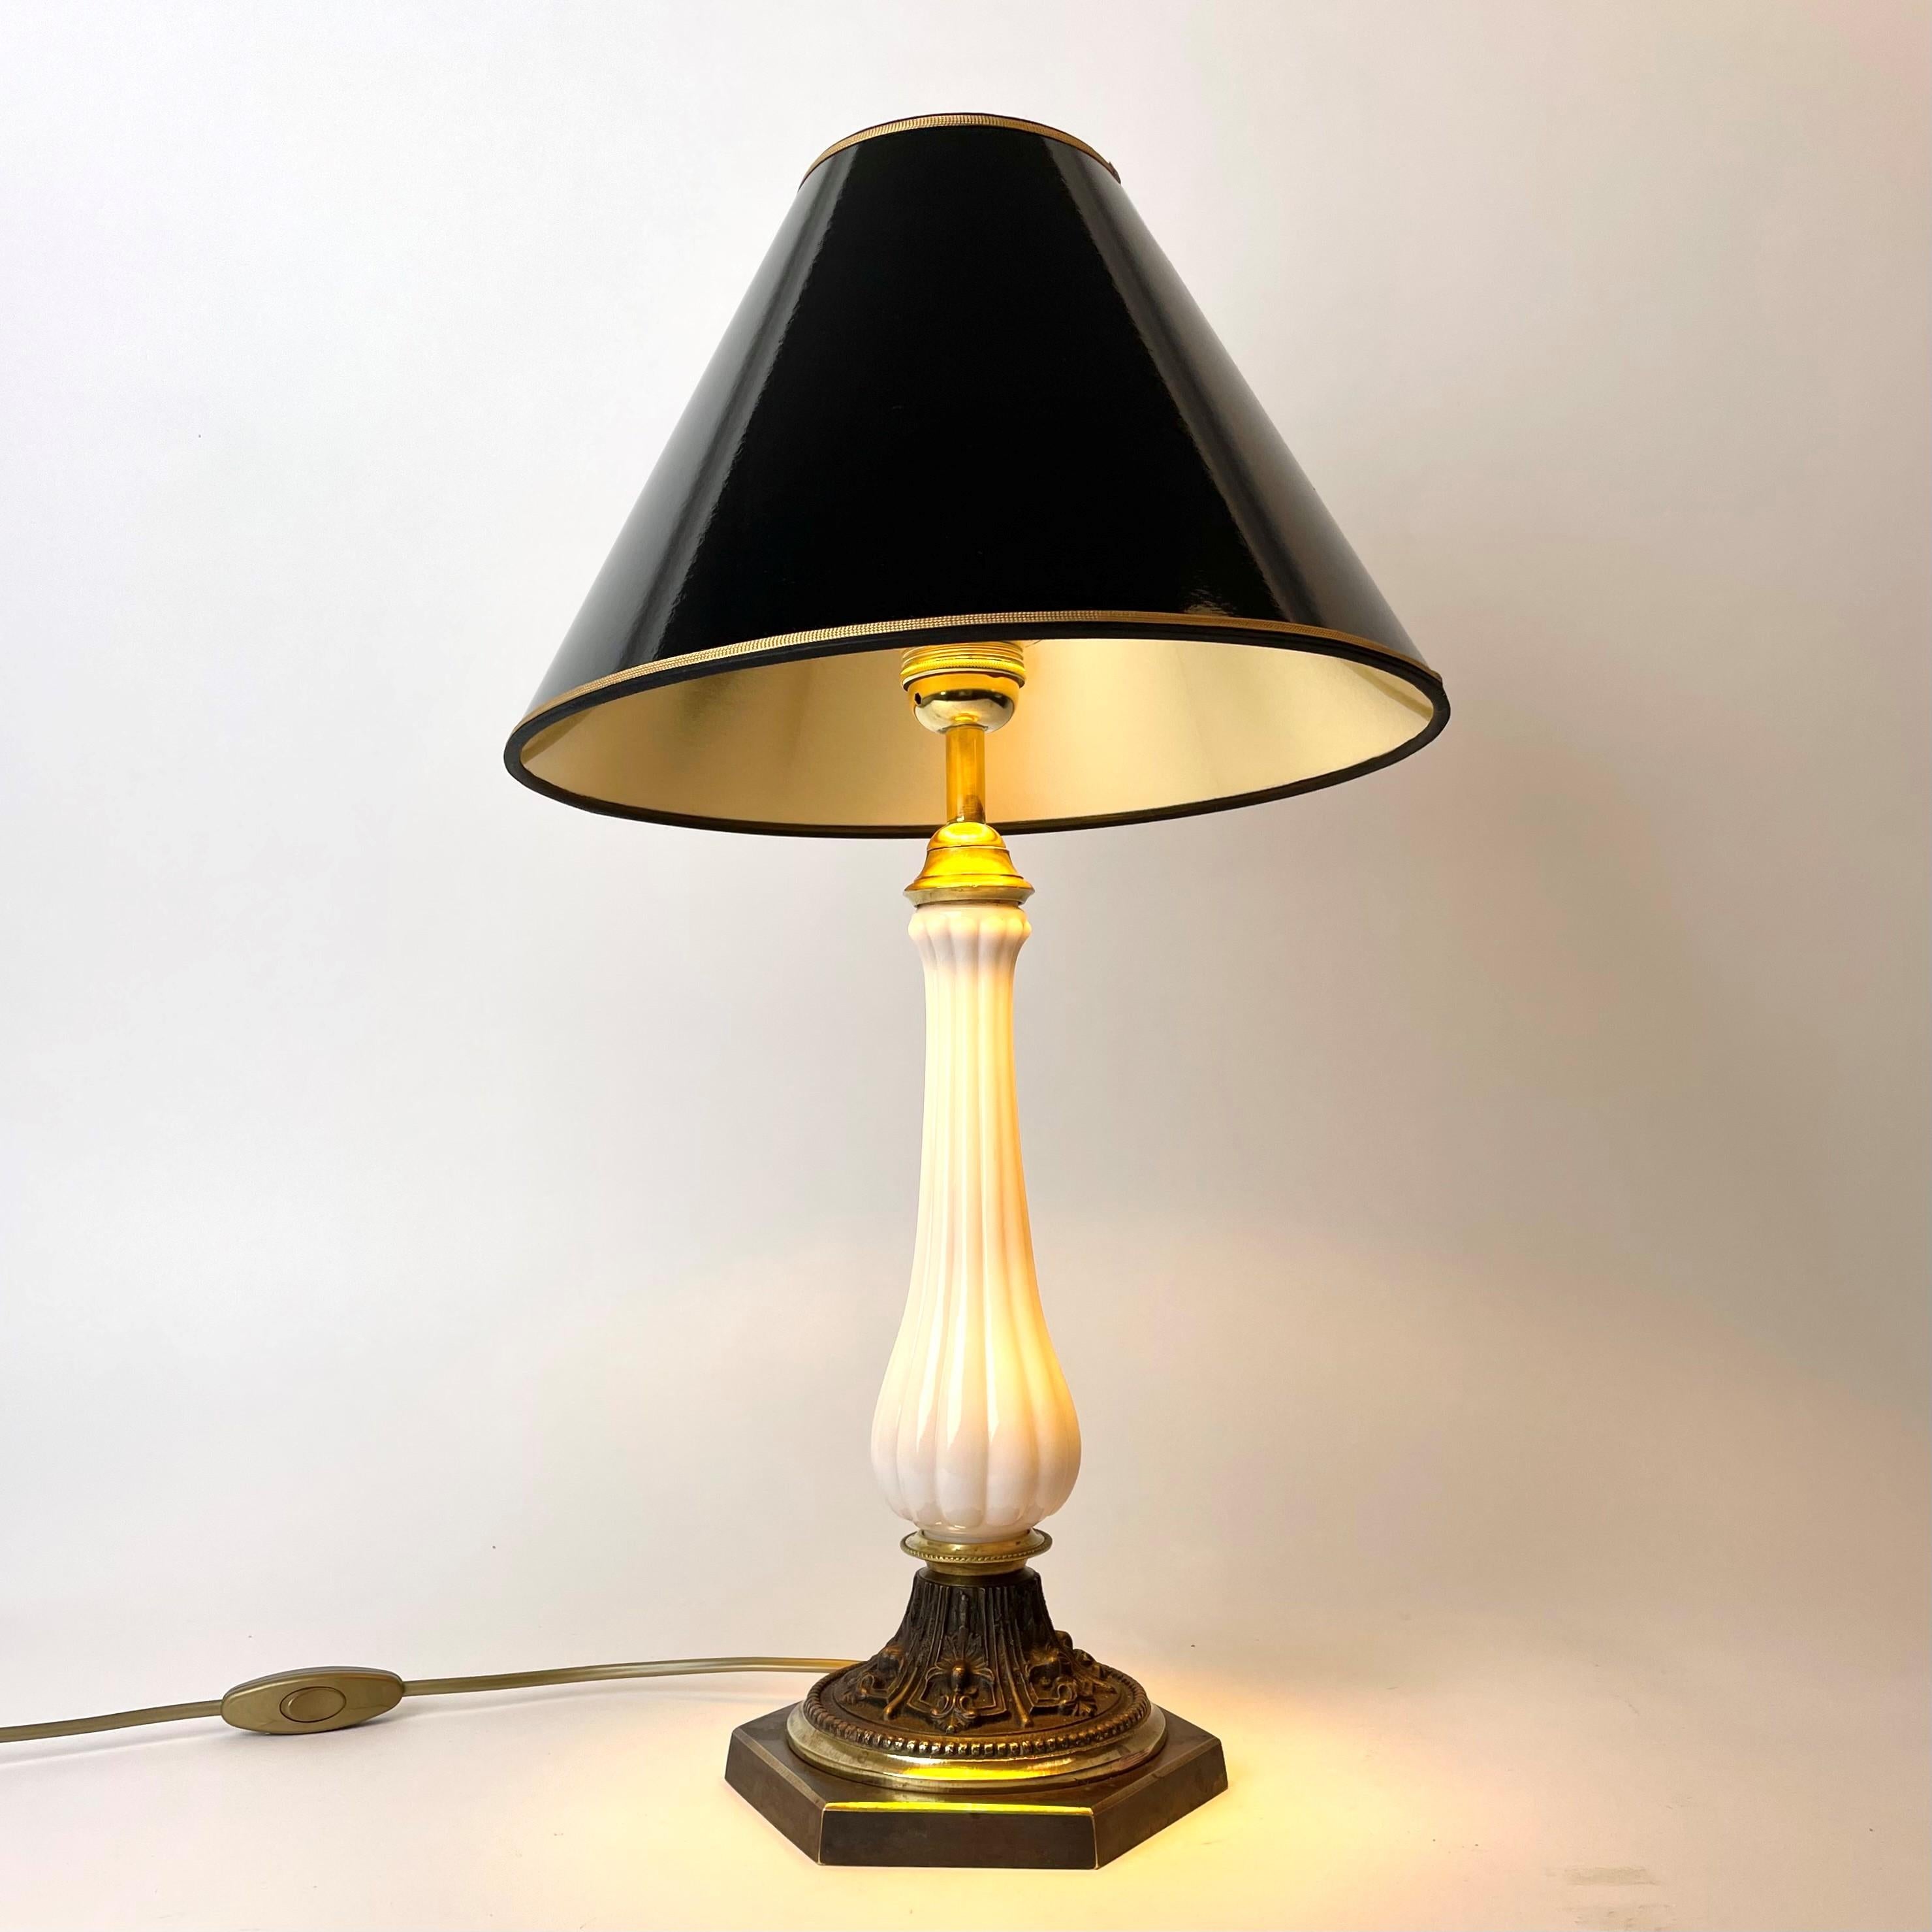 Beautiful table lamp in opaline glass and patinated and partly gilt bronze. Originally a oil lampe and later converted för electricity. Provenance Baron Bonde at Ericbergs Castle in Sweden.

Newly drawn electricity

Wear consistent with age and